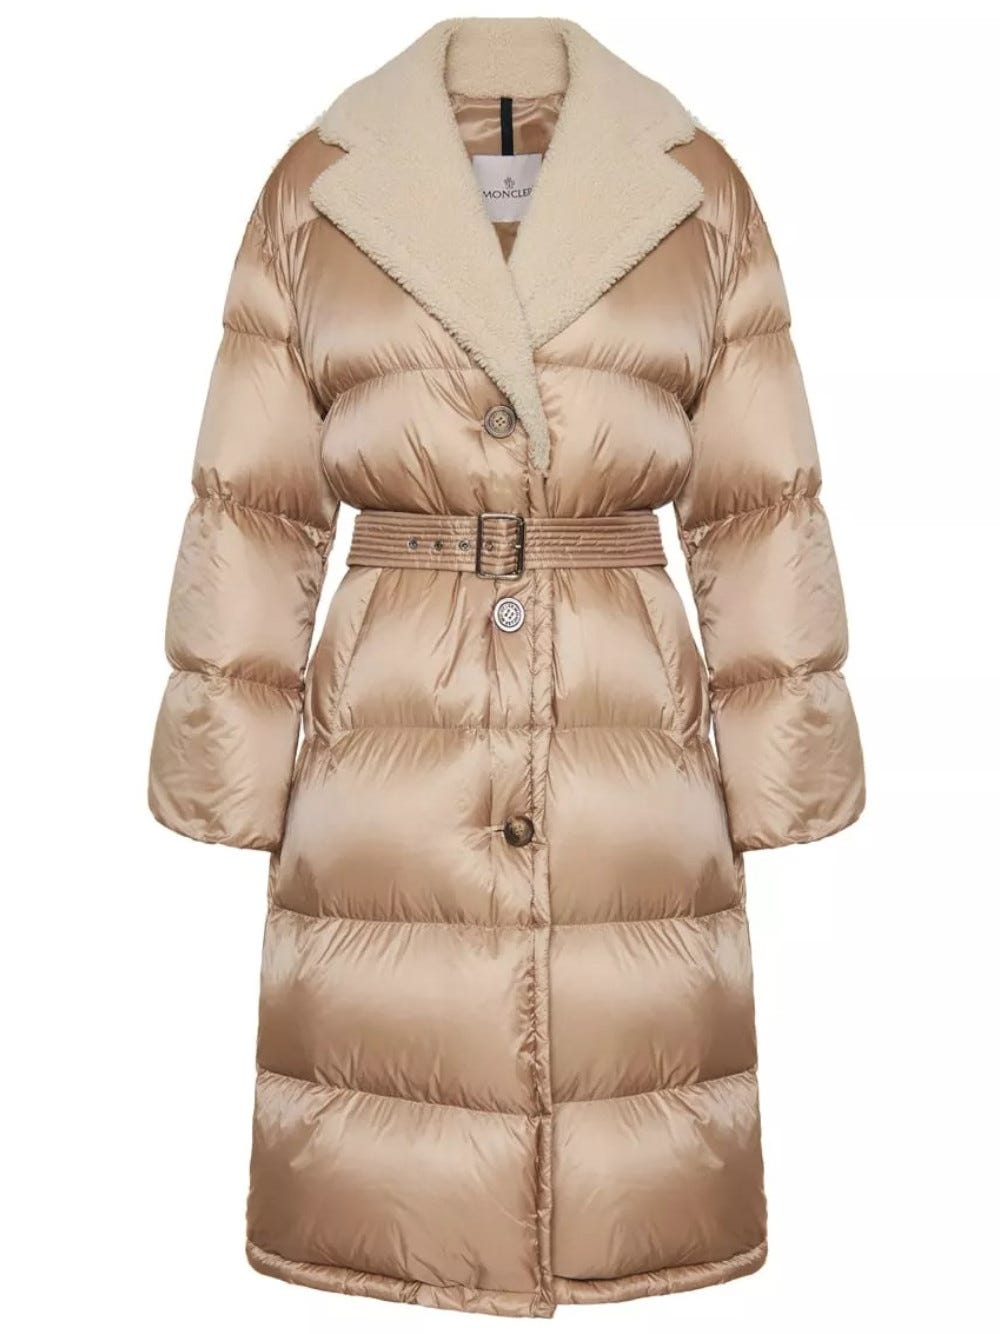 MONCLER BEIGE GOURGUET LONG DOWN JACKET WITH SHEARLING LAPELS